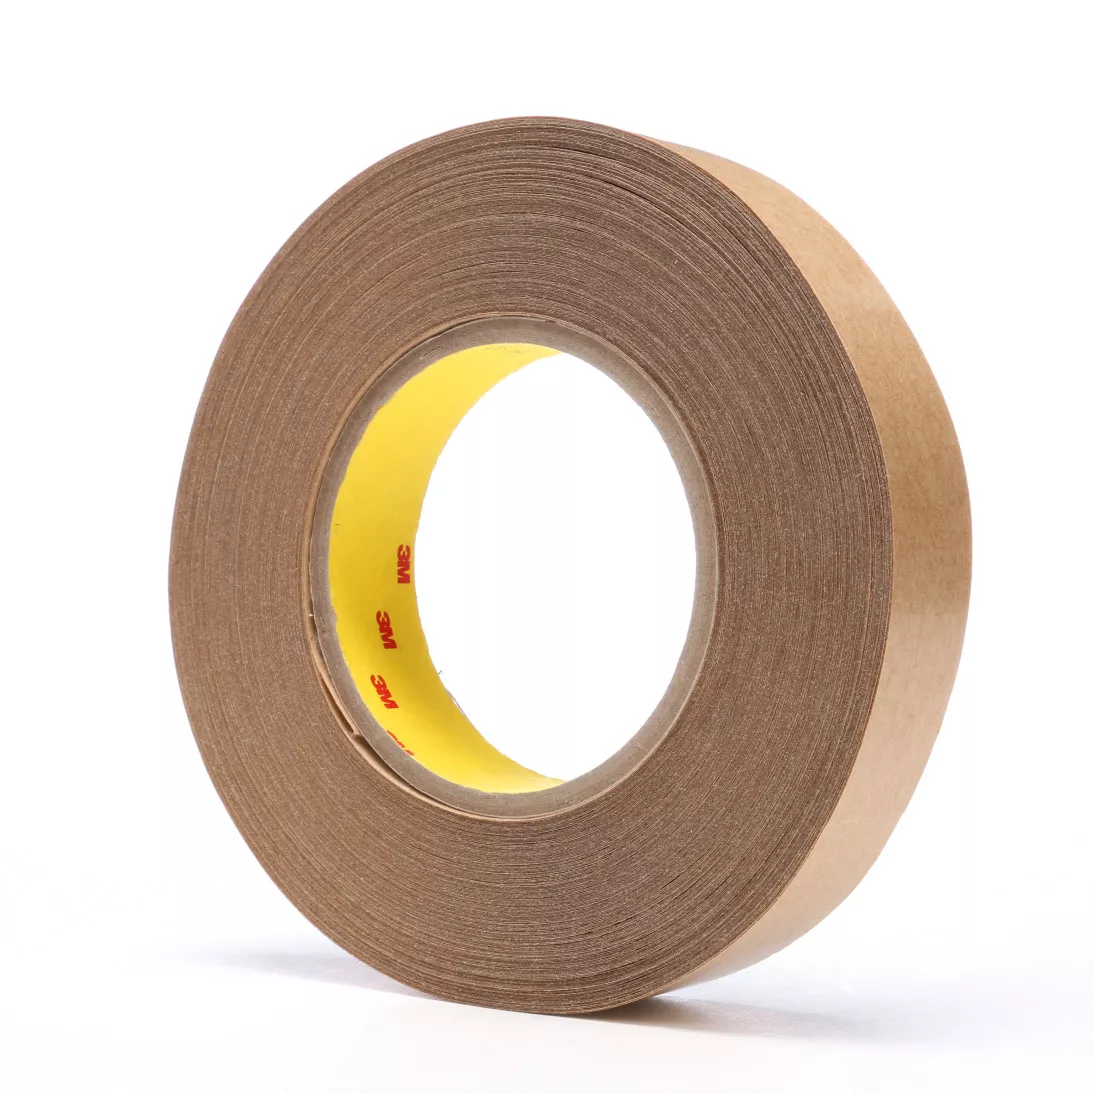 3M™ Adhesive Transfer Tape 950, Clear, 1 in x 60 yd, 5 mil, 36 rolls per
case